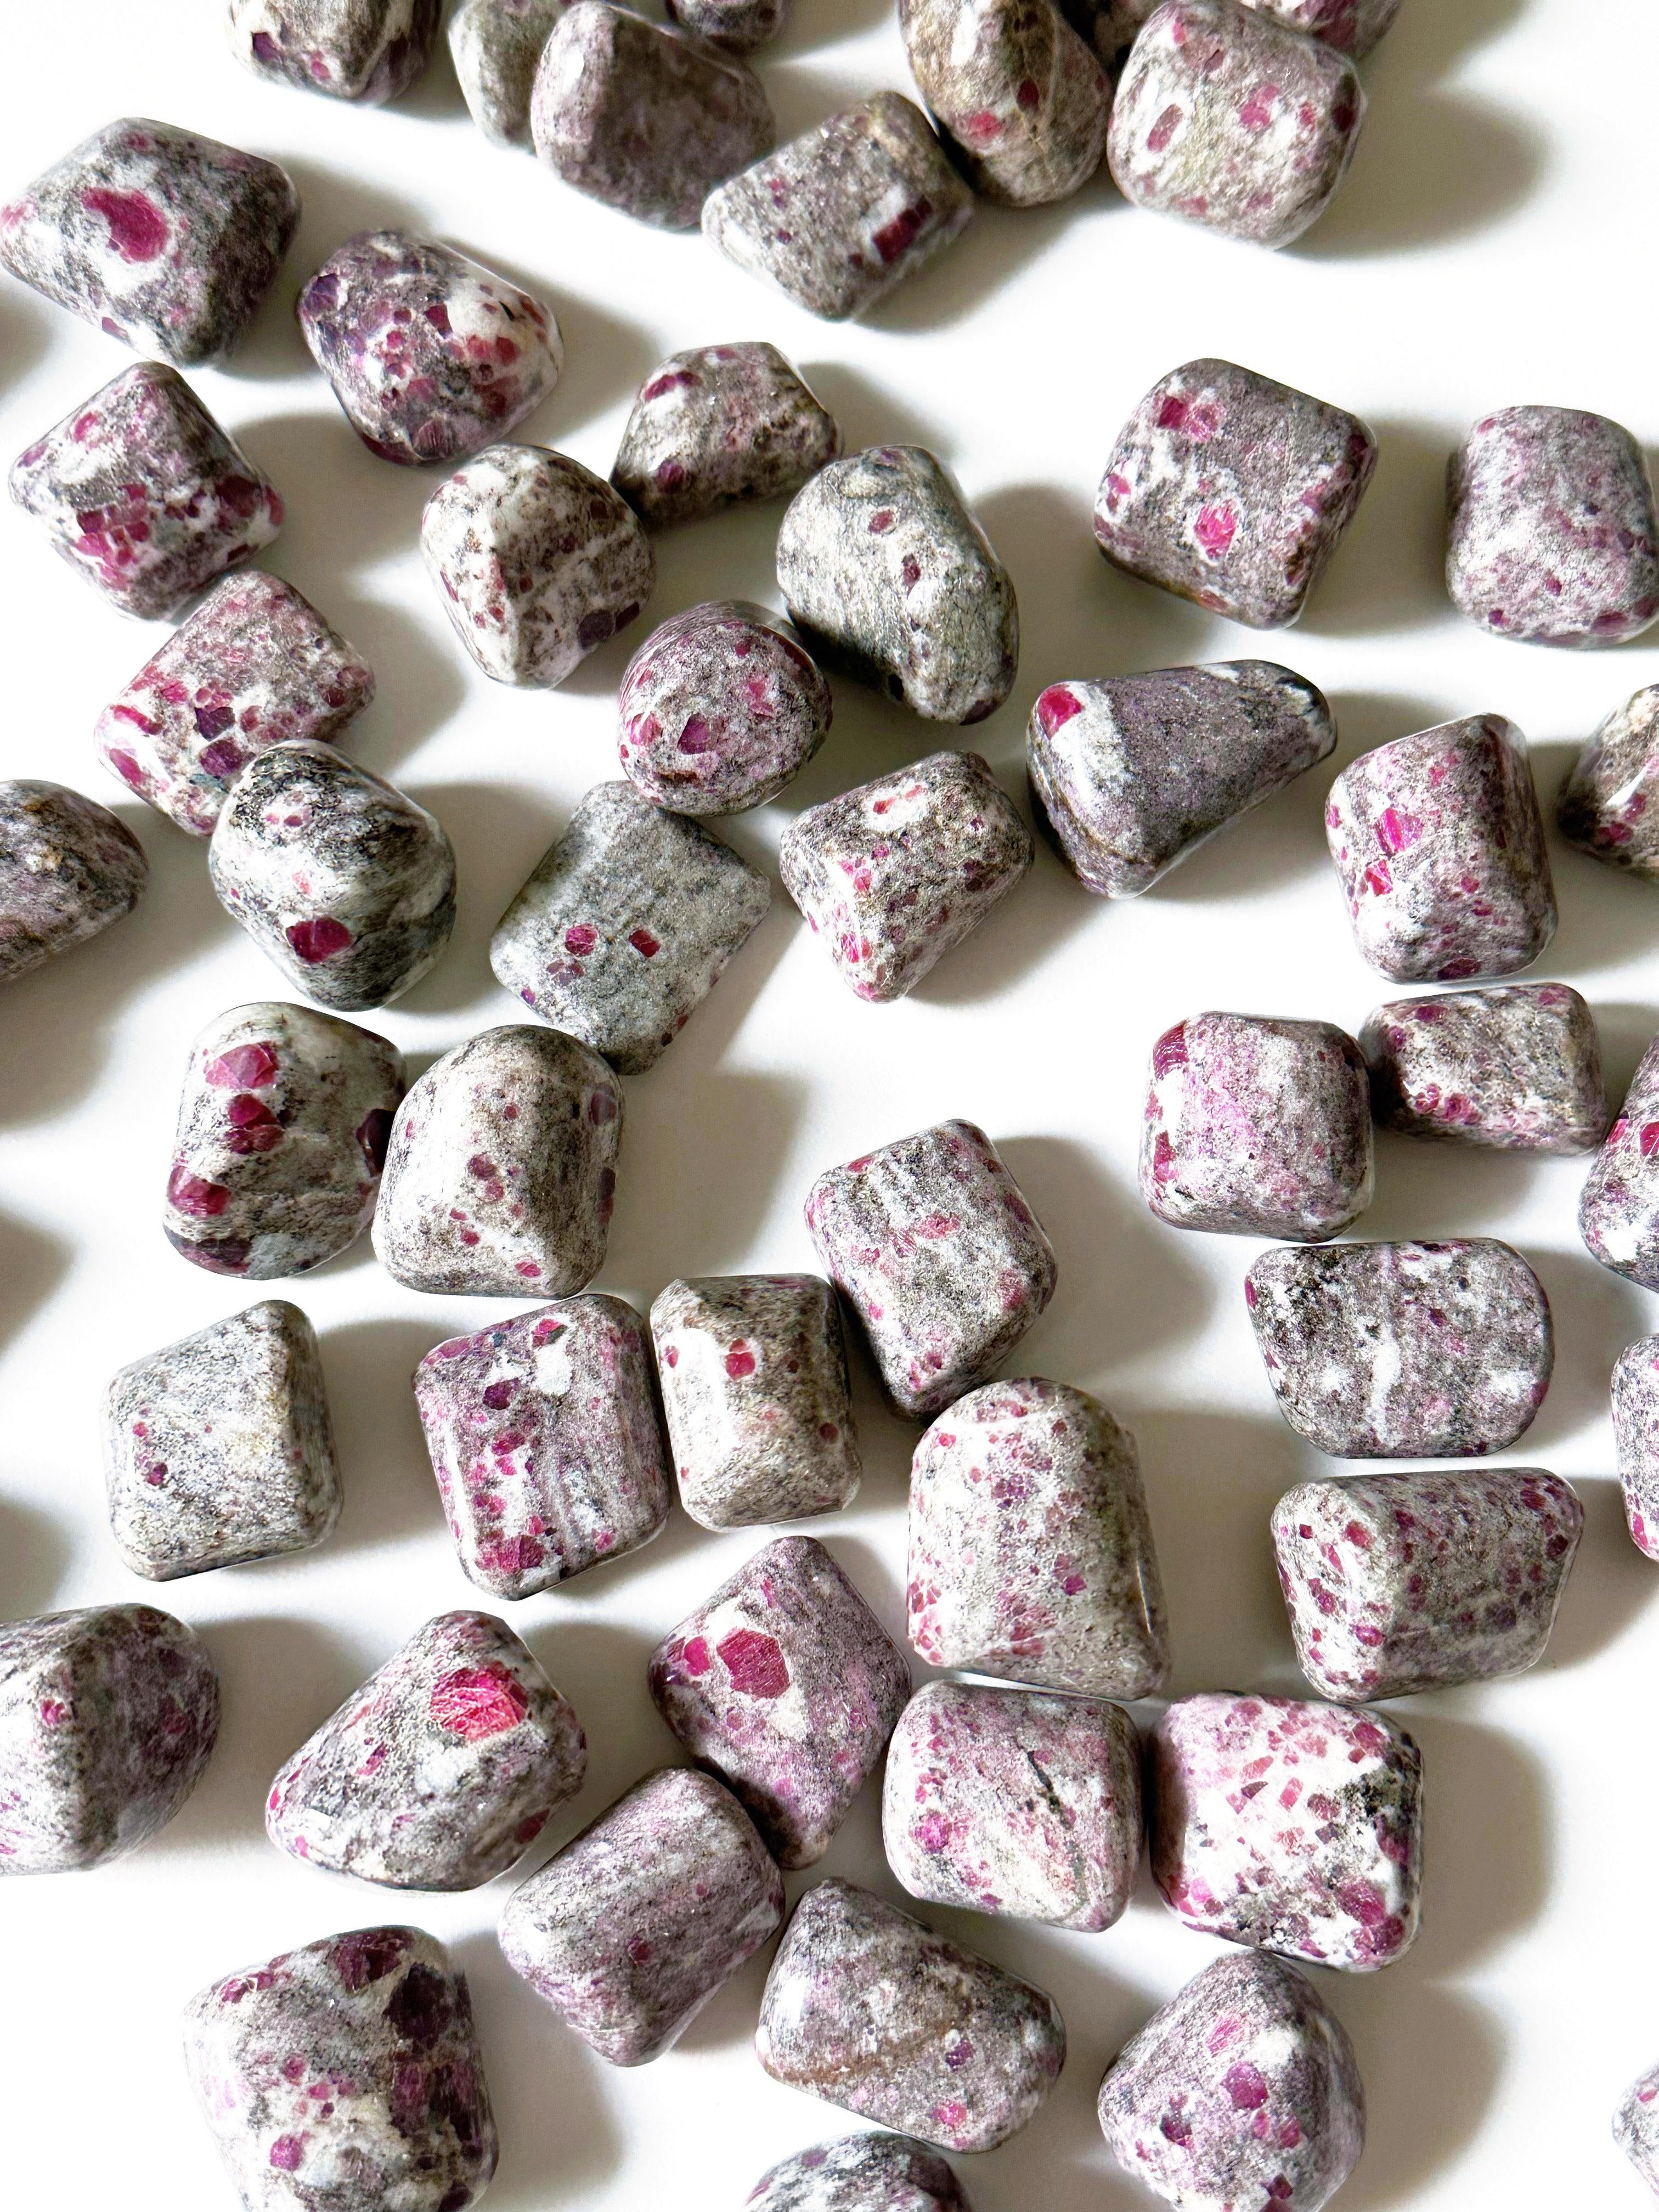 RUBY IN ALBITE TUMBLE - 33 bday, albite, bulk, end of year sale, holiday sale, pocket crystal, pocket crystals, pocket stone, recently added, ruby, ruby in albite, tumble, tumbled stone, tumbles - The Mineral Maven